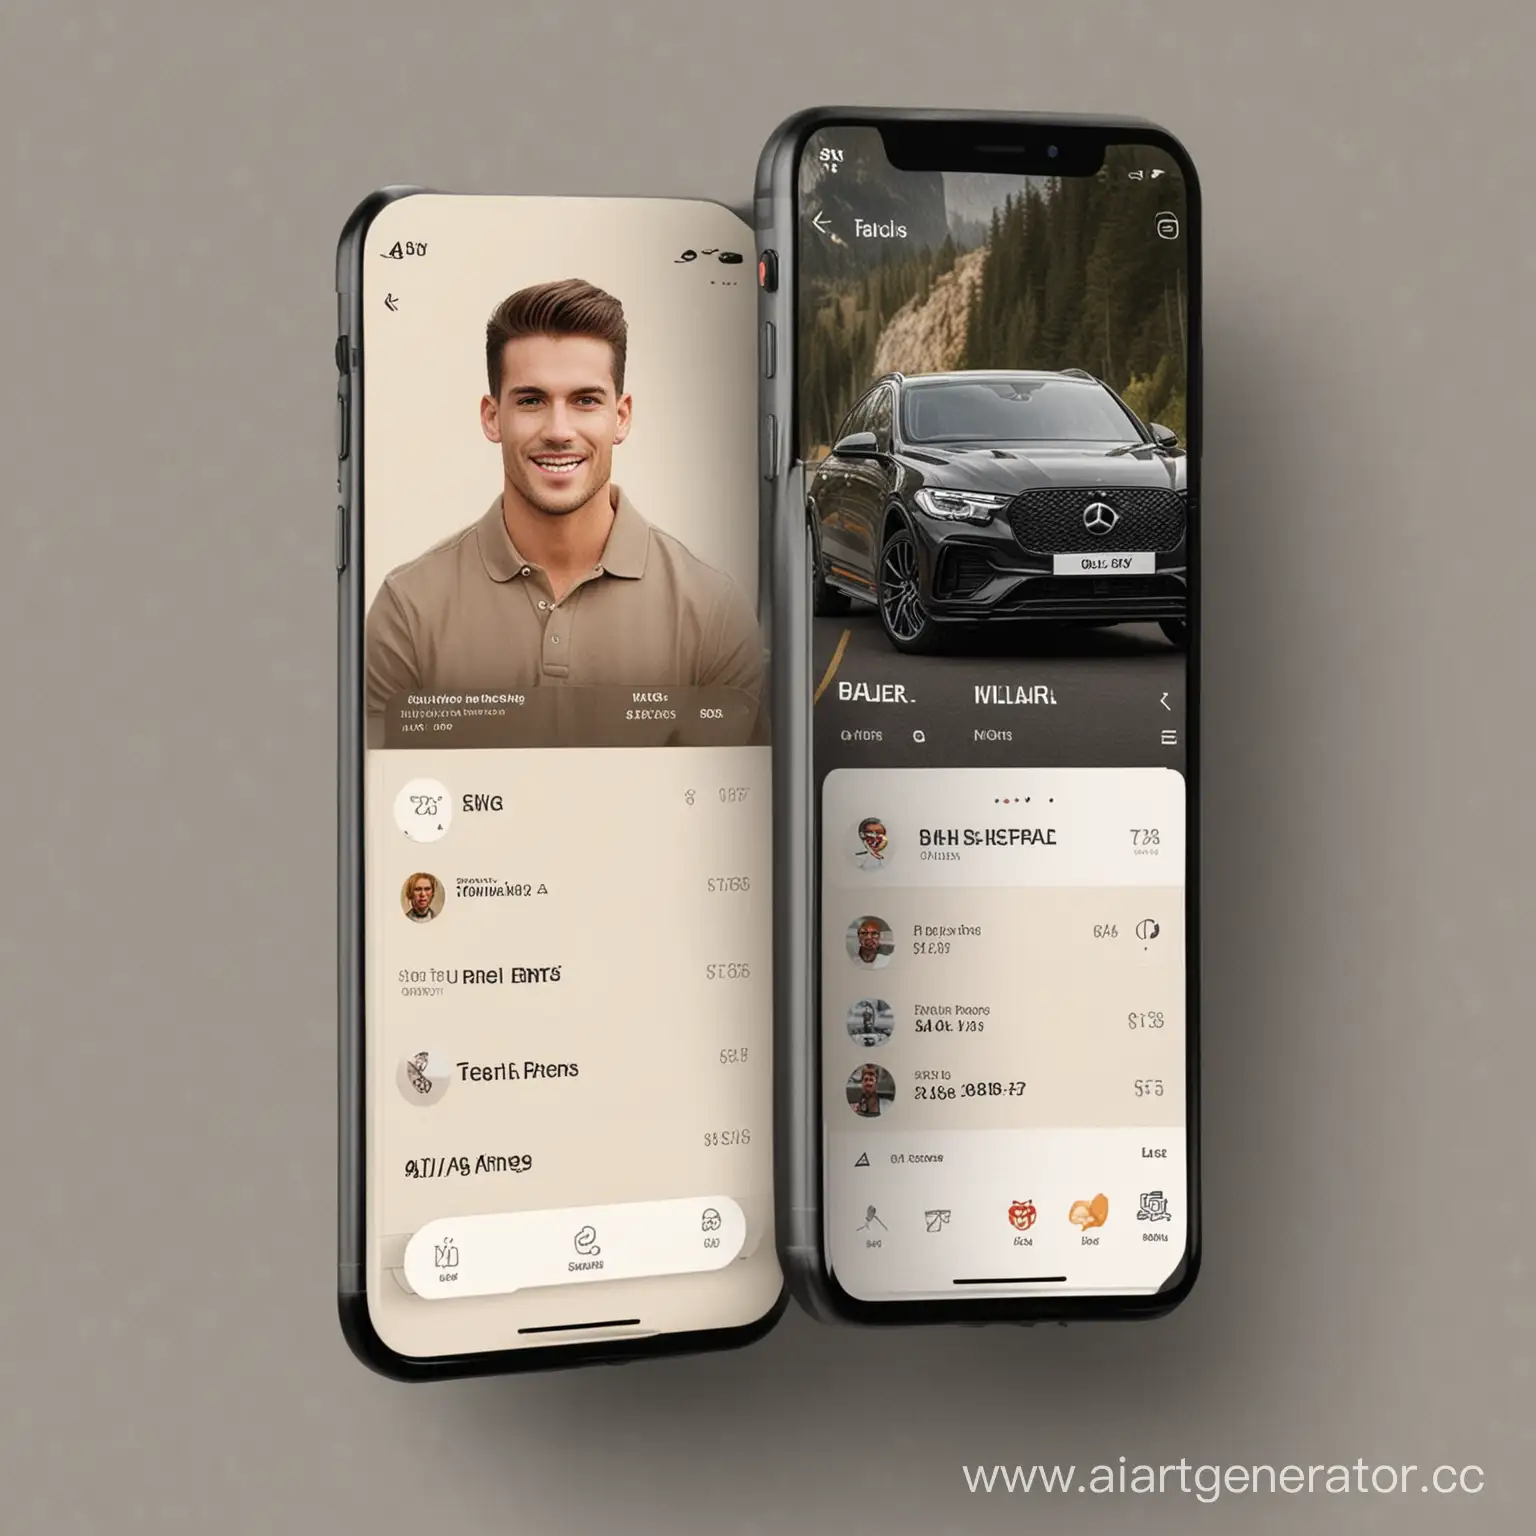 Customizing-Car-Preferences-in-the-User-Profile-on-a-Vehicle-Marketplace-App